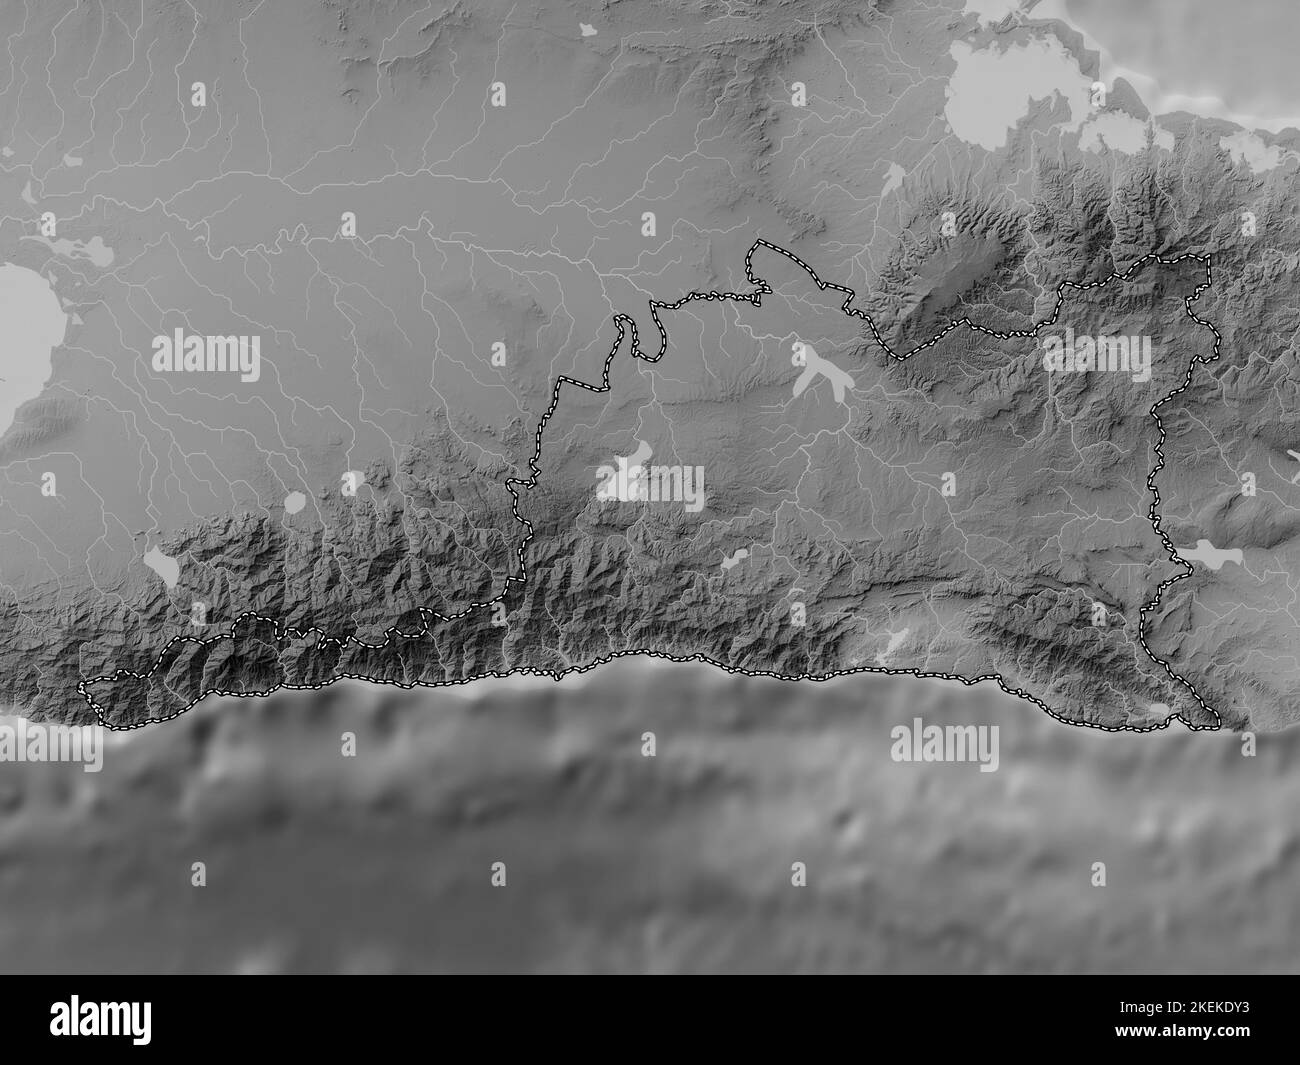 Santiago de Cuba, province of Cuba. Grayscale elevation map with lakes and rivers Stock Photo